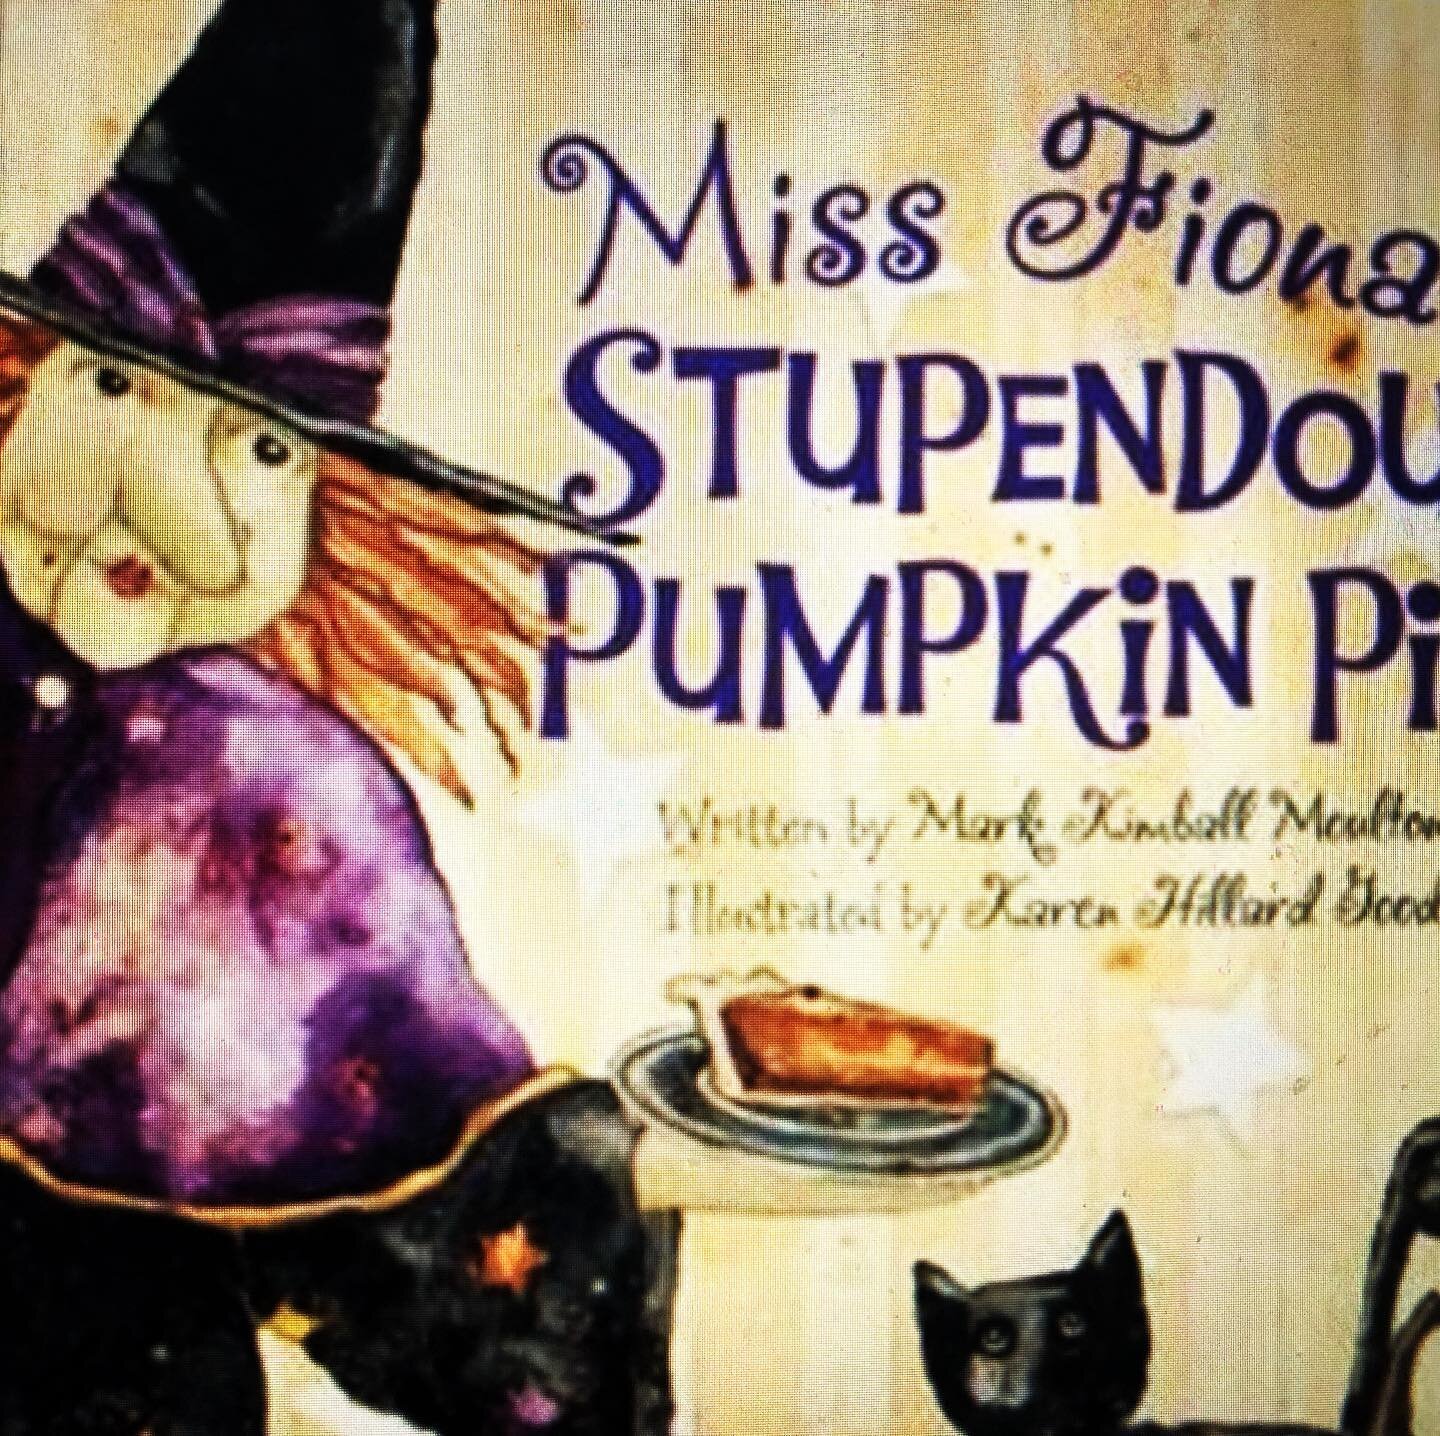 This autumn I will transform into Miss Fiona as I share her tale about Stupendous Pumpkin Pies!